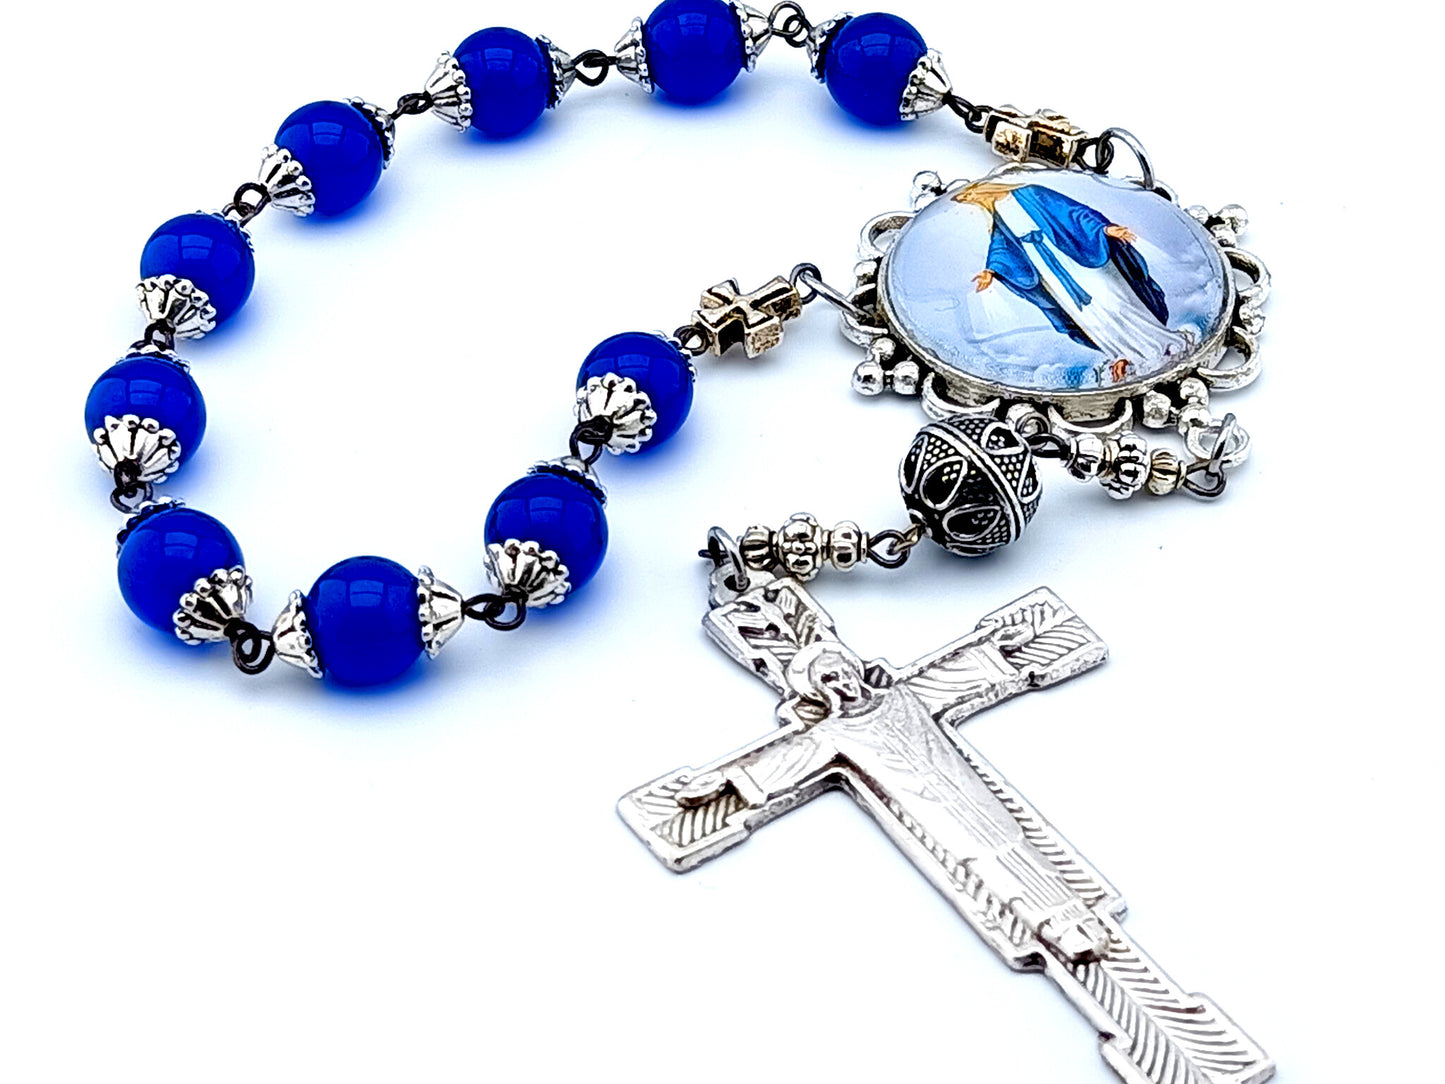 Our Lady of Grace unique rosary beads sapphire gemstone single decade rosary beads with the Resurrection crucifix.